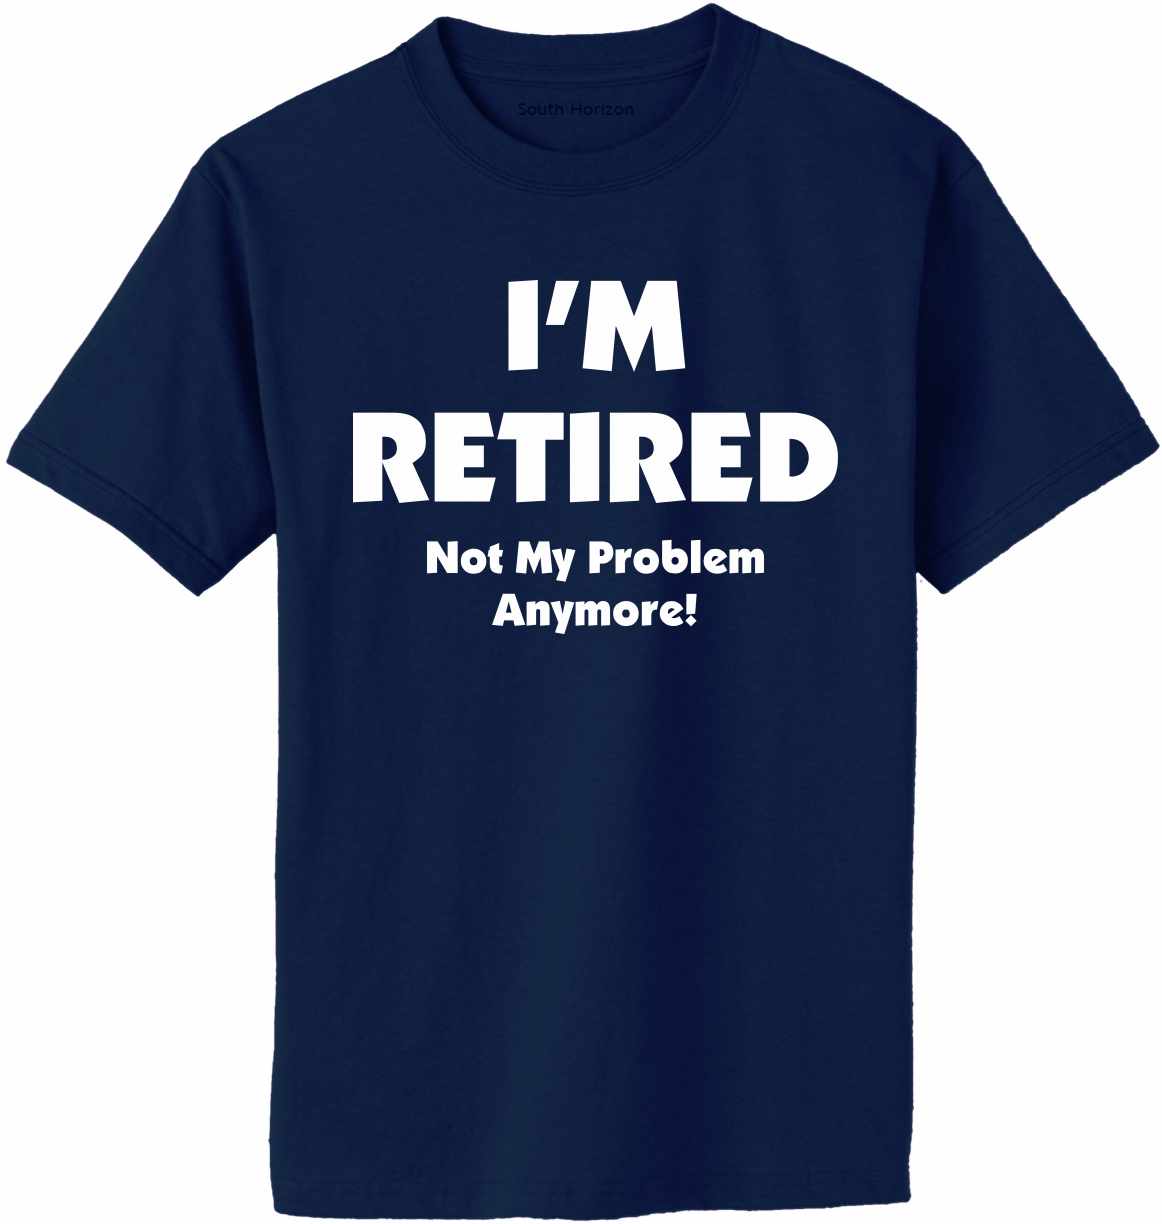 I'M RETIRED NOT MY PROBLEM ANYMORE Adult T-Shirt